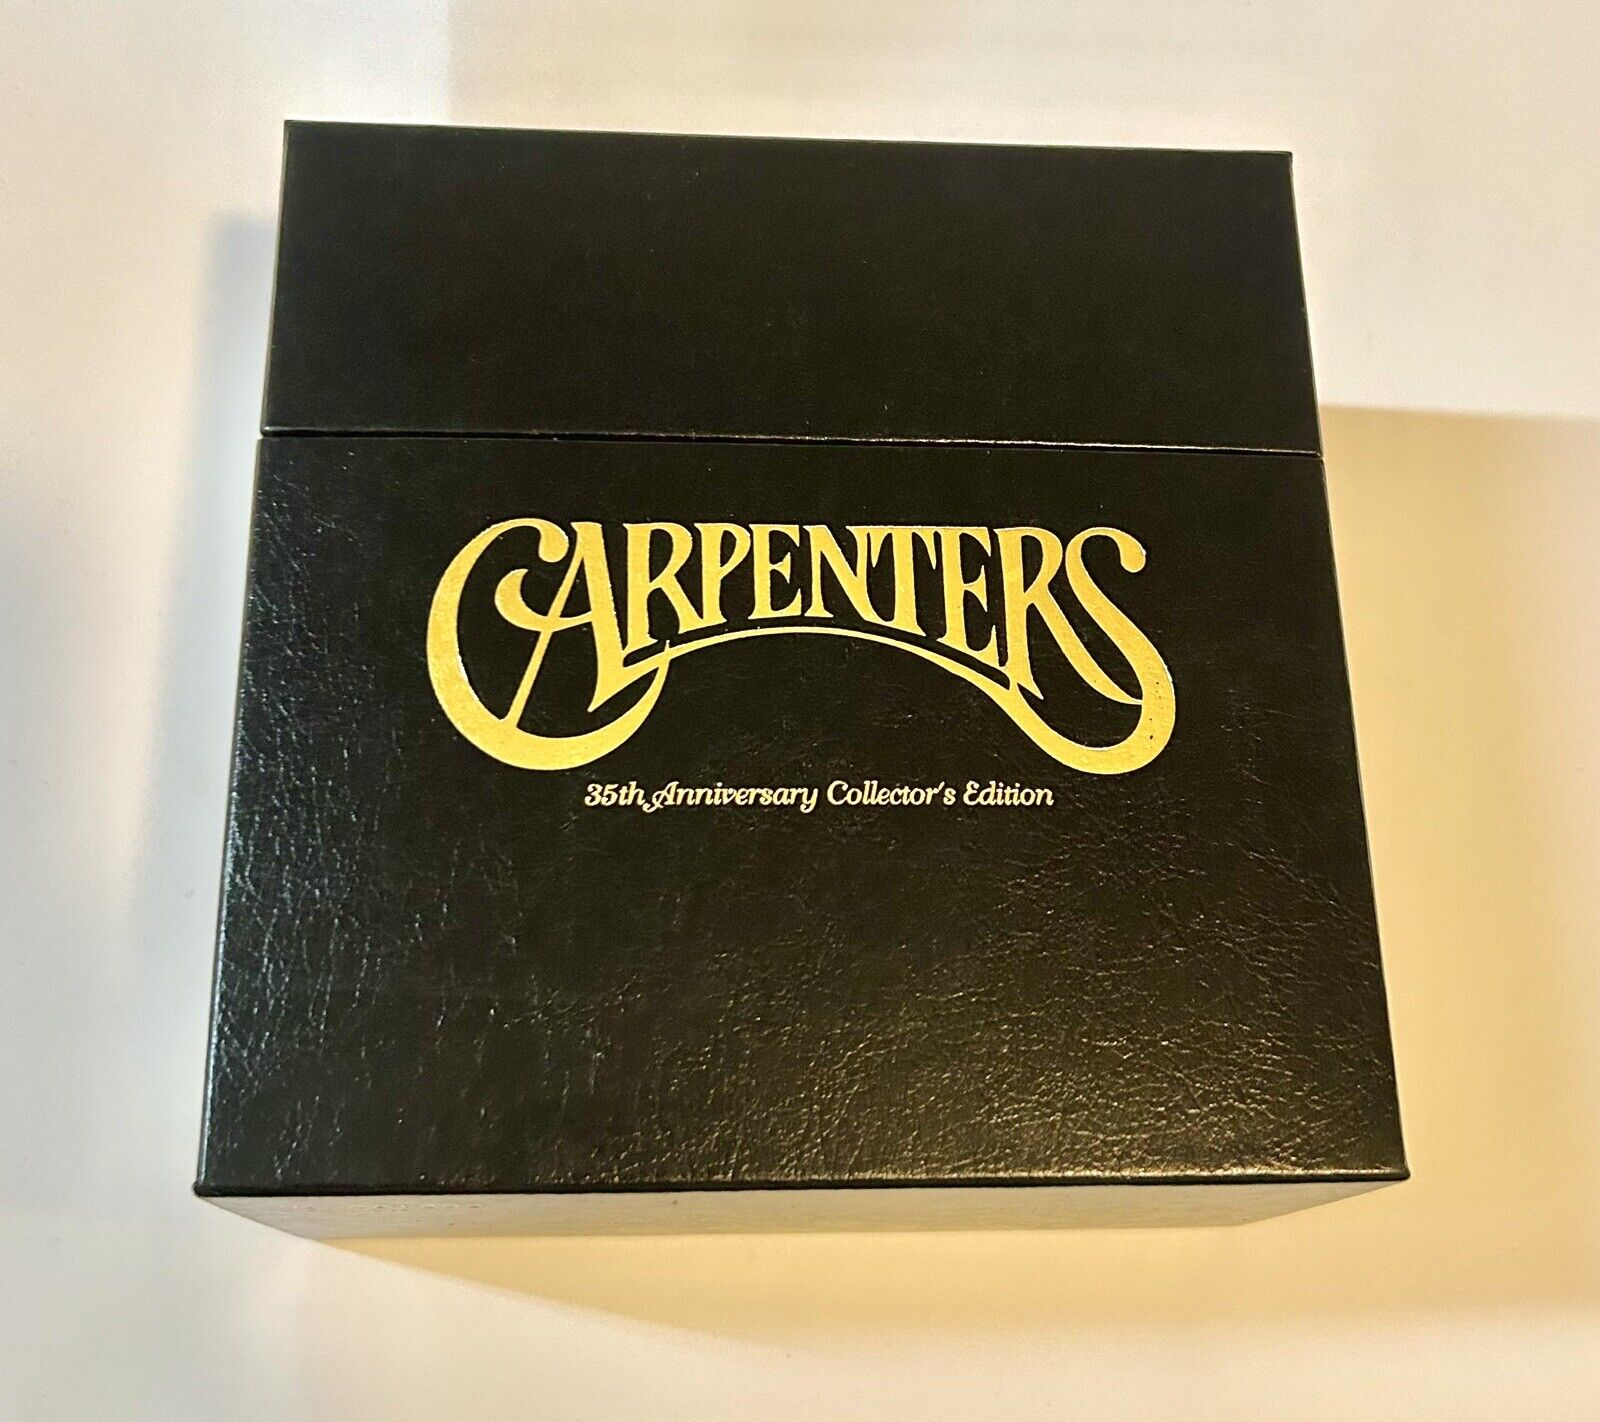 Carpenters Box 35th Anniversary Collector\'s Edition 11CDs USED Japan